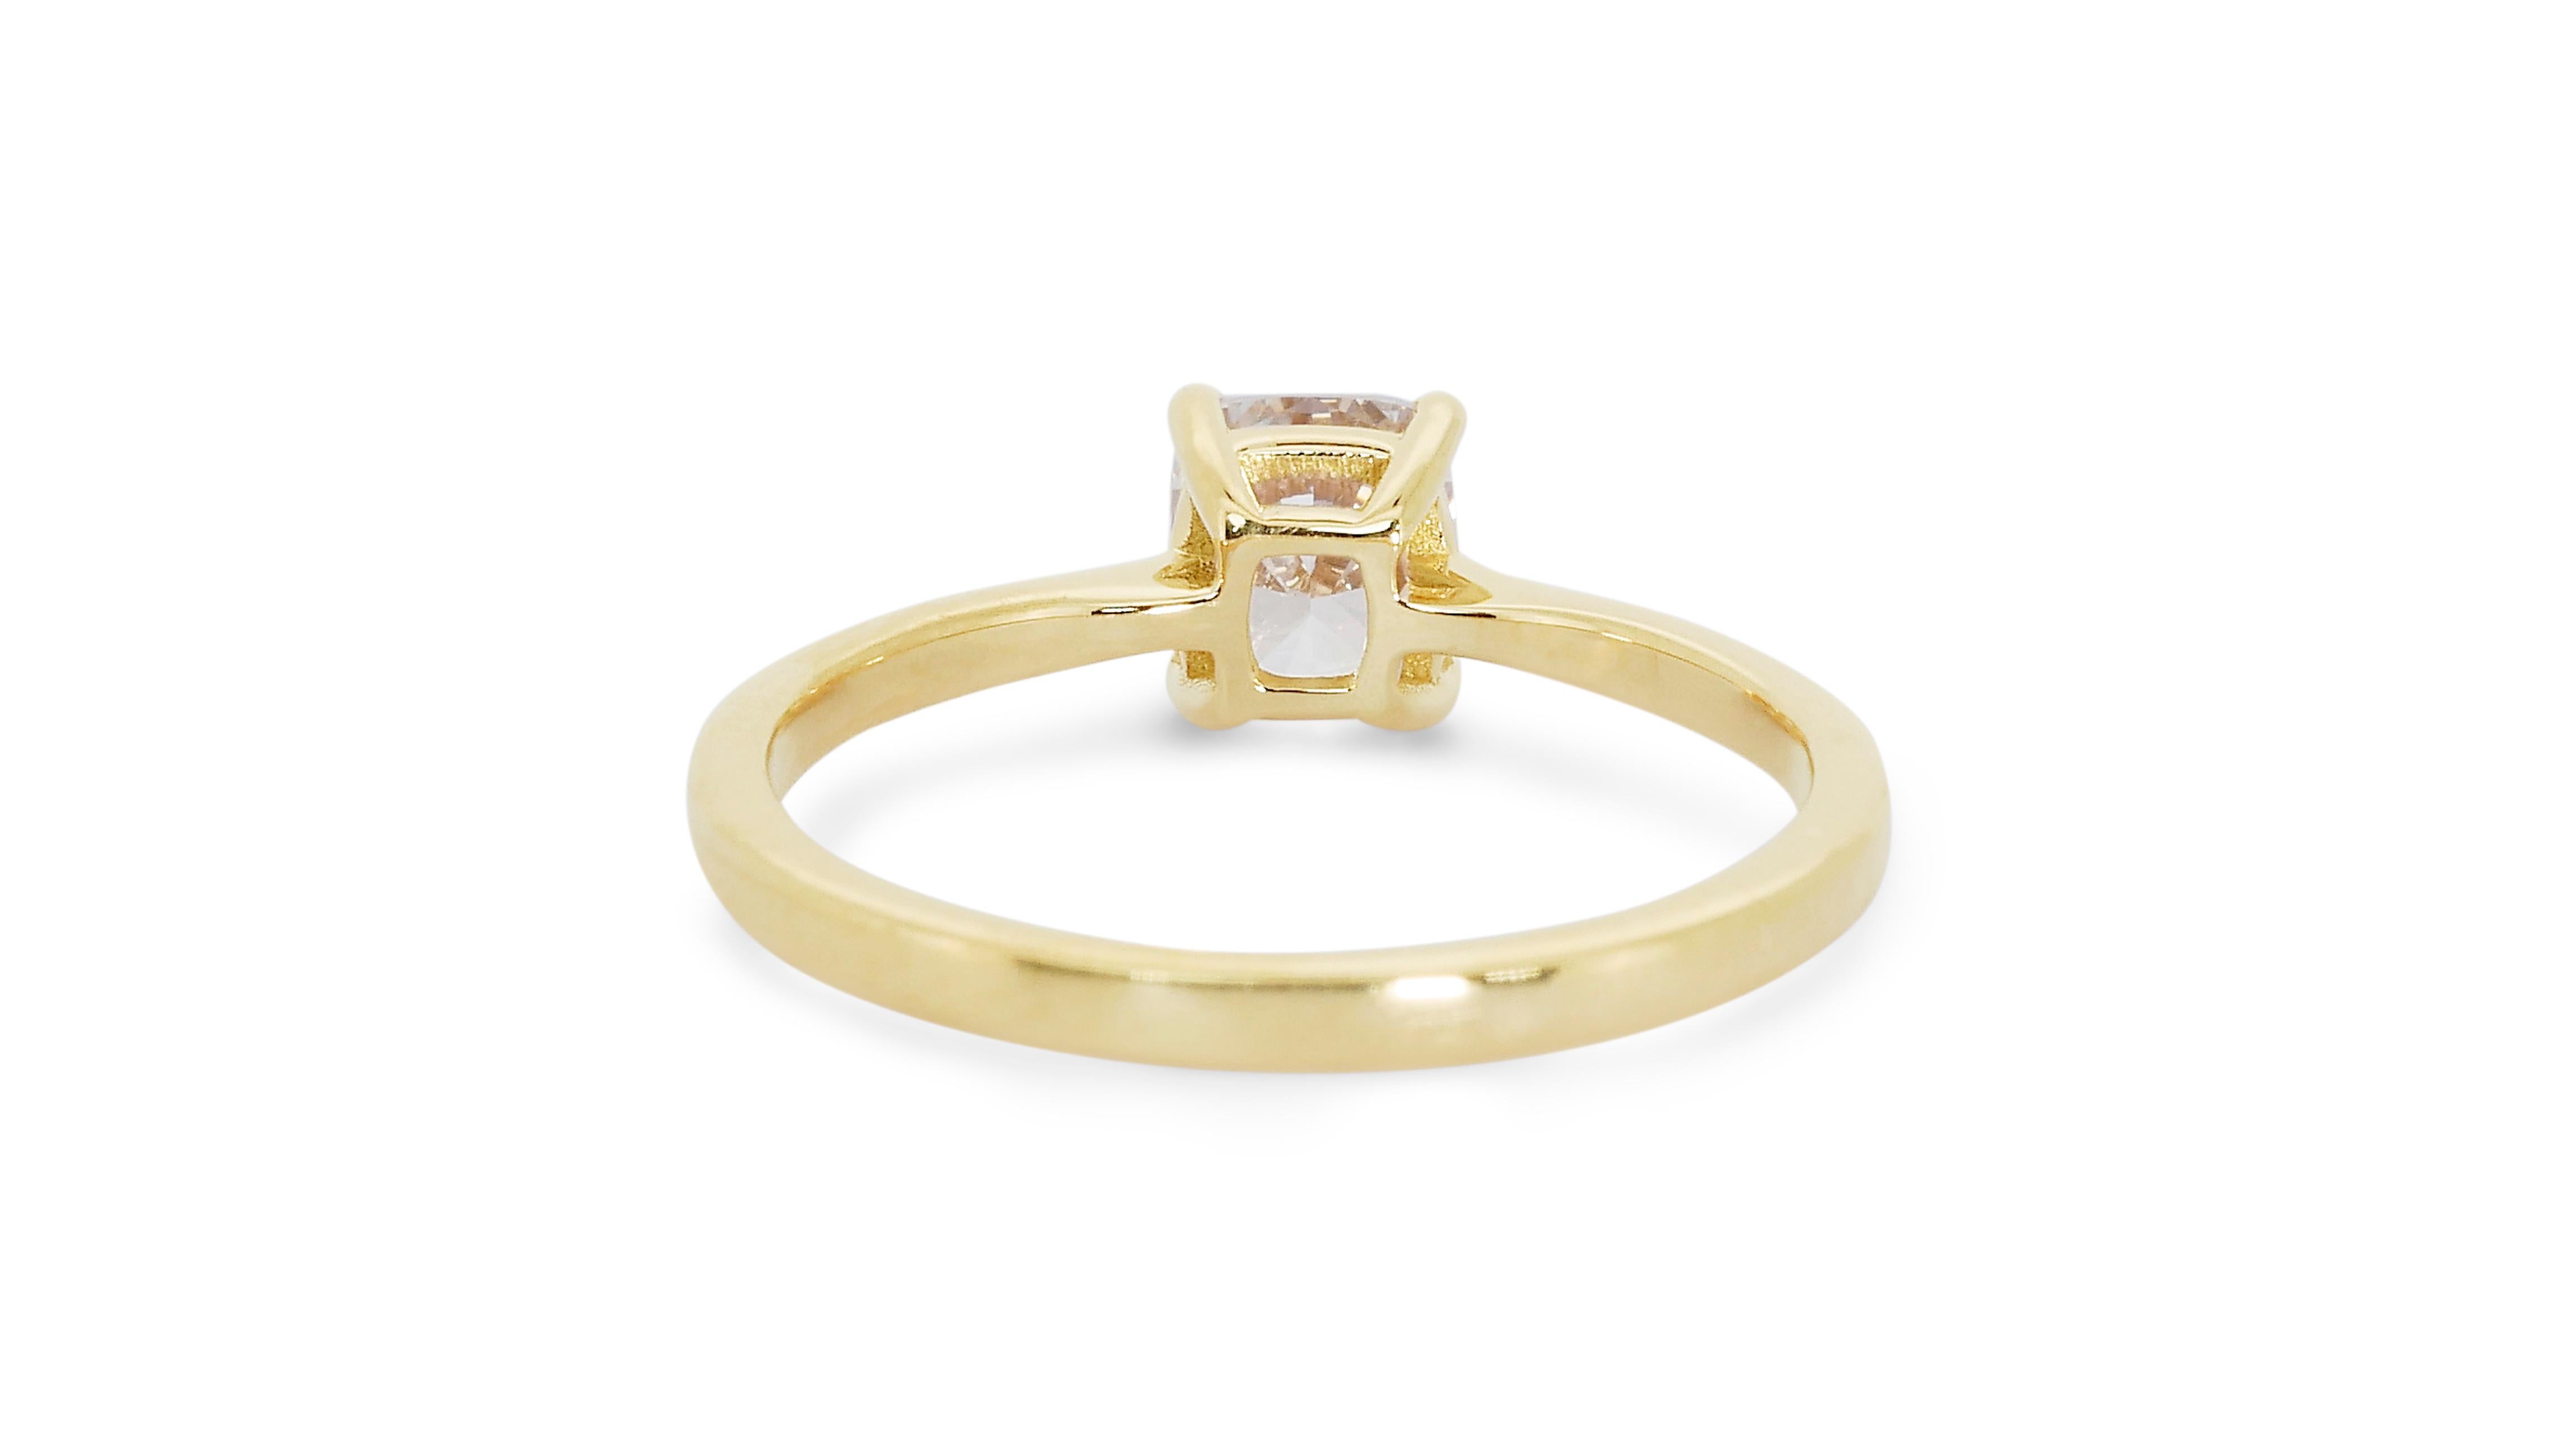 Glamorous 18k Yellow Gold Solitaire Ring w/ 0.80 ct Natural Diamonds IGI Cert For Sale 3